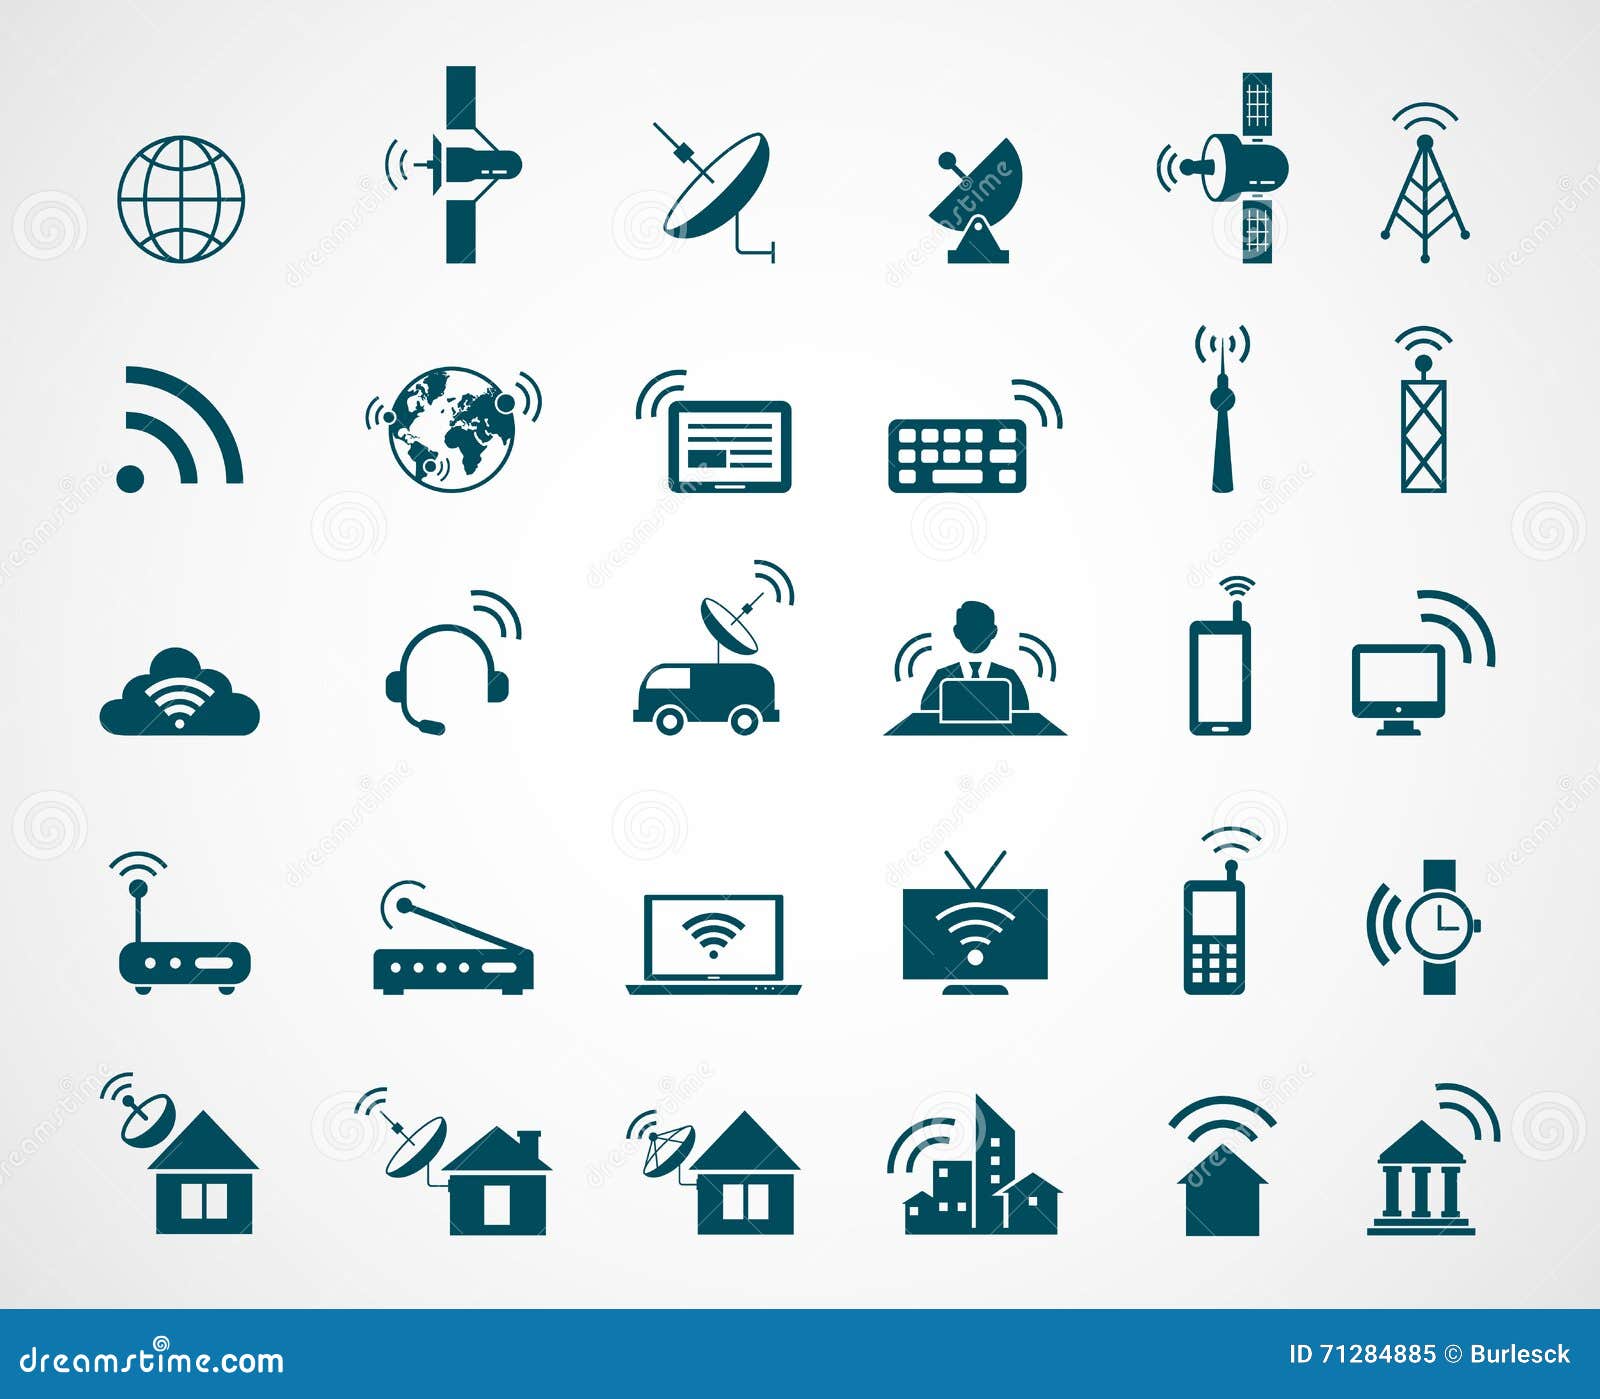 antenna and wireless technology icons